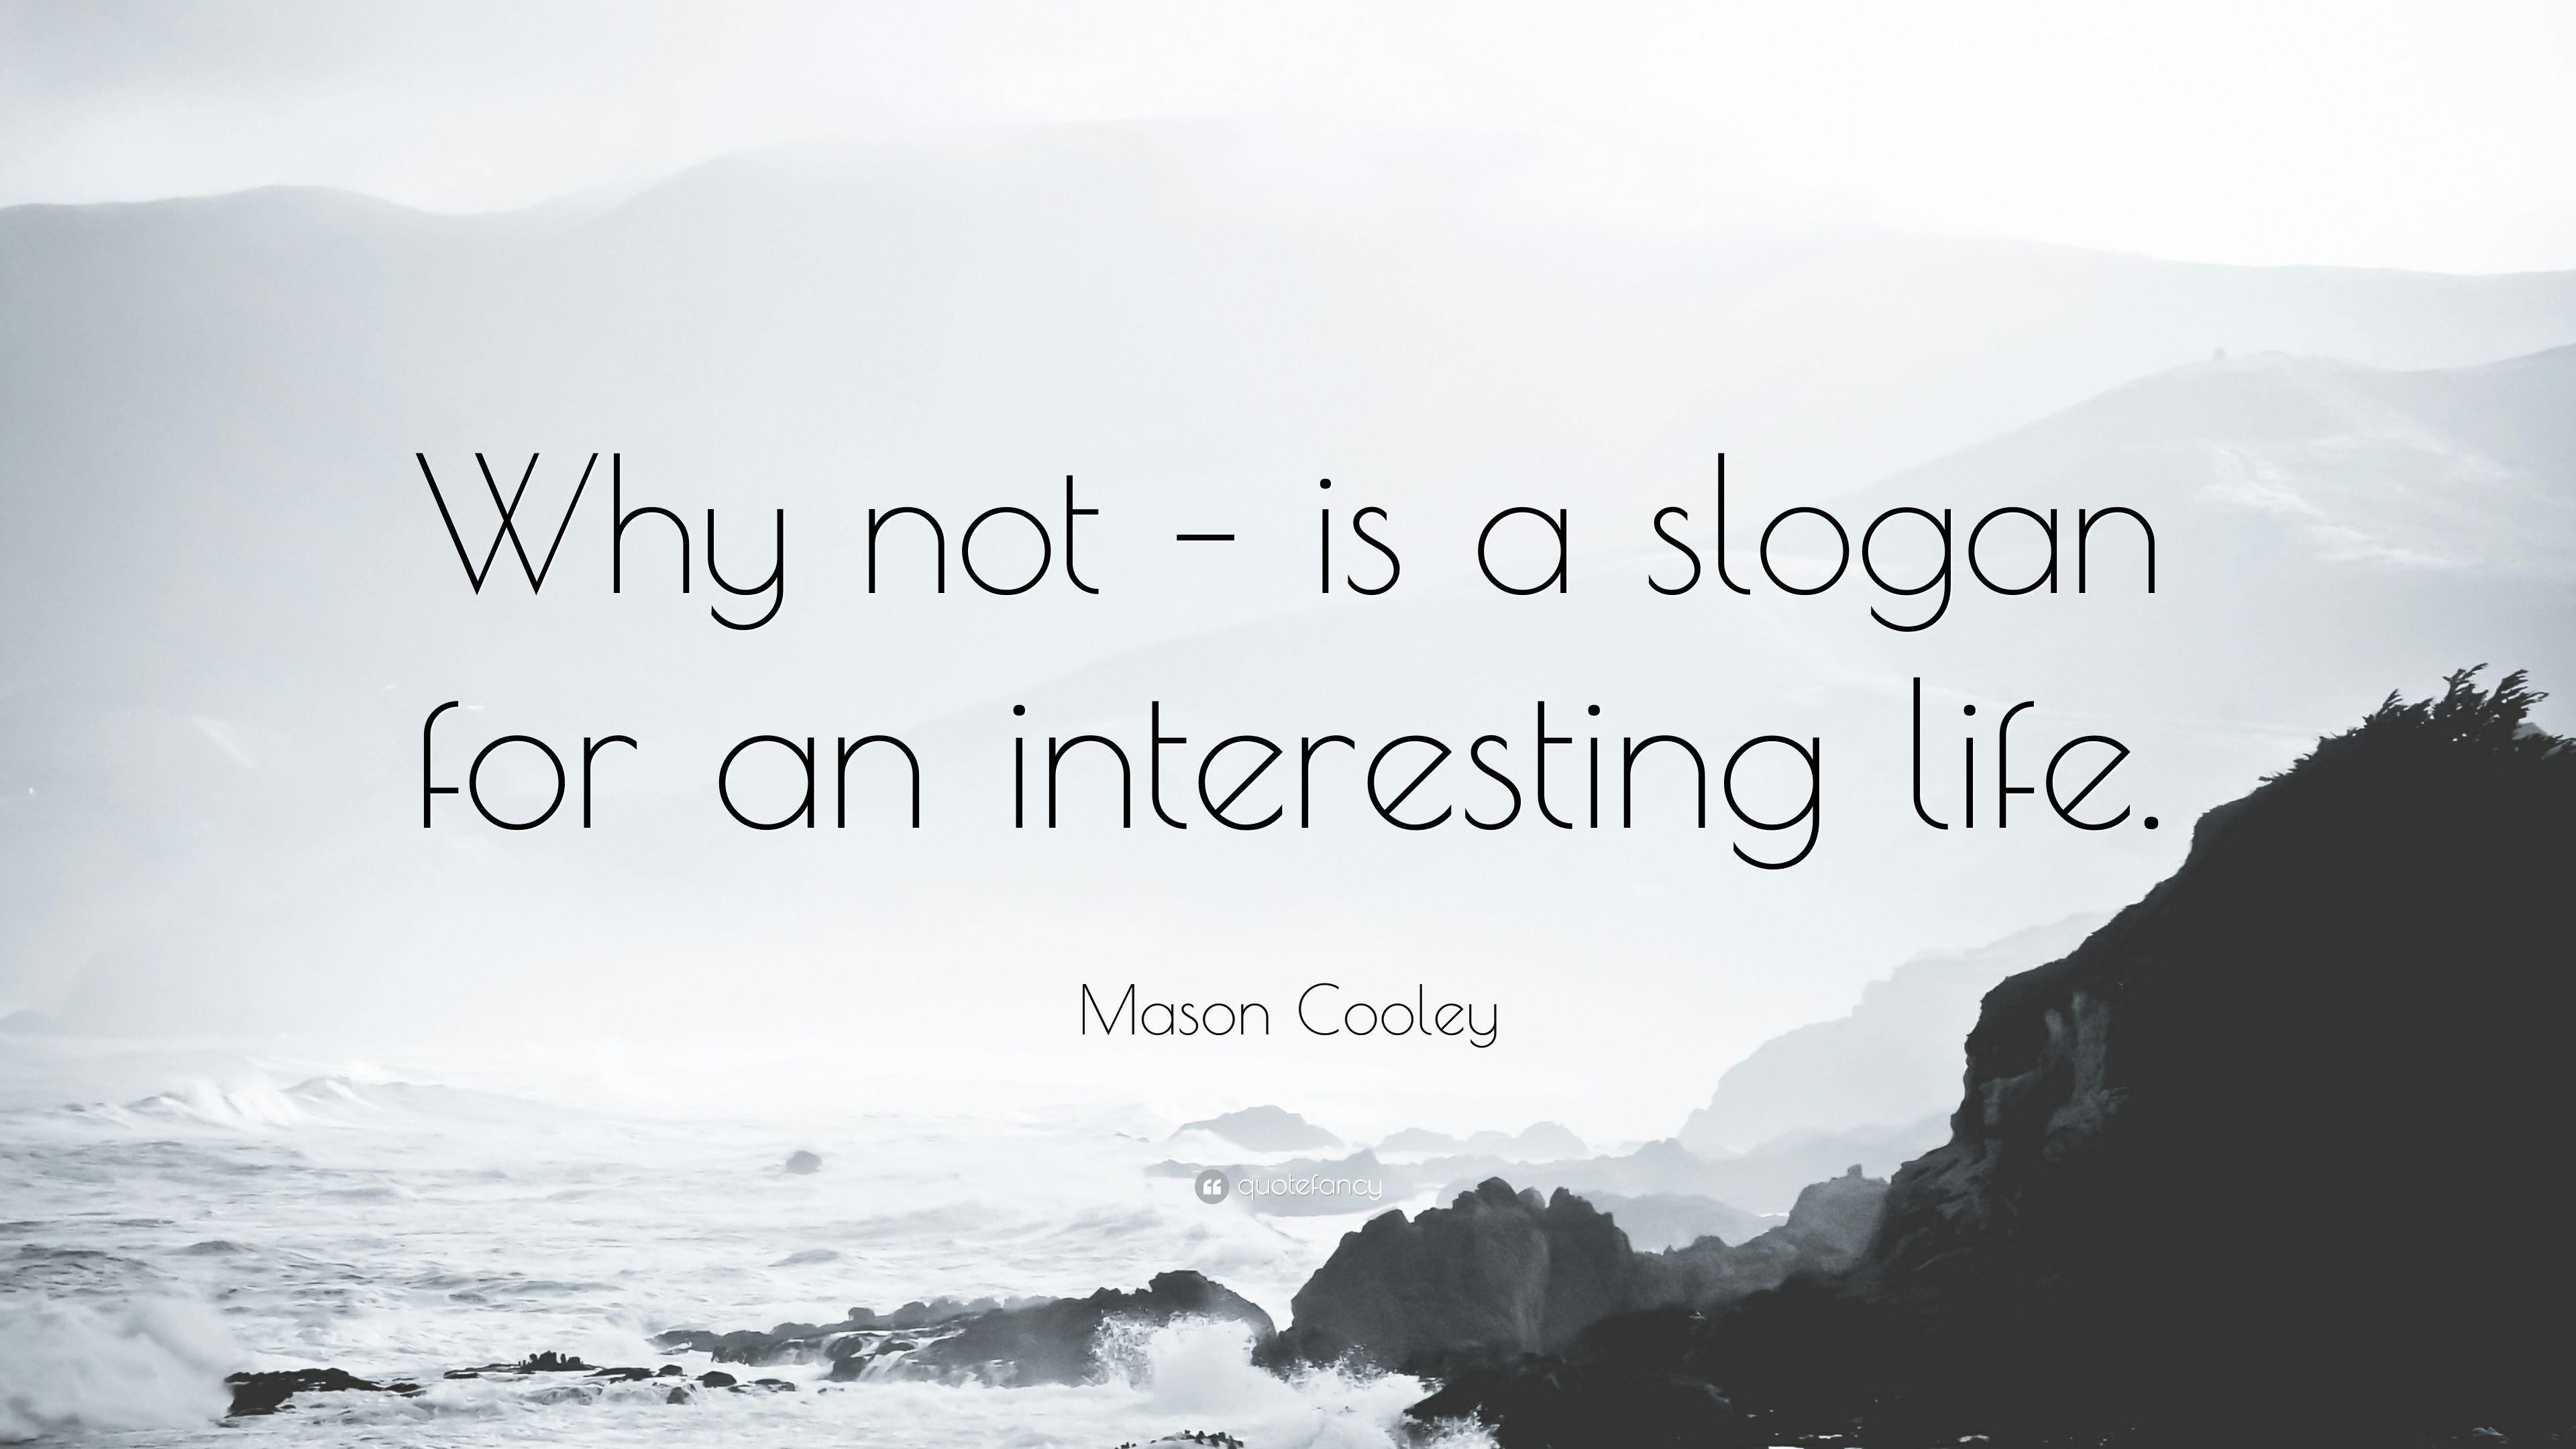 Mason Cooley Quote: “Why not